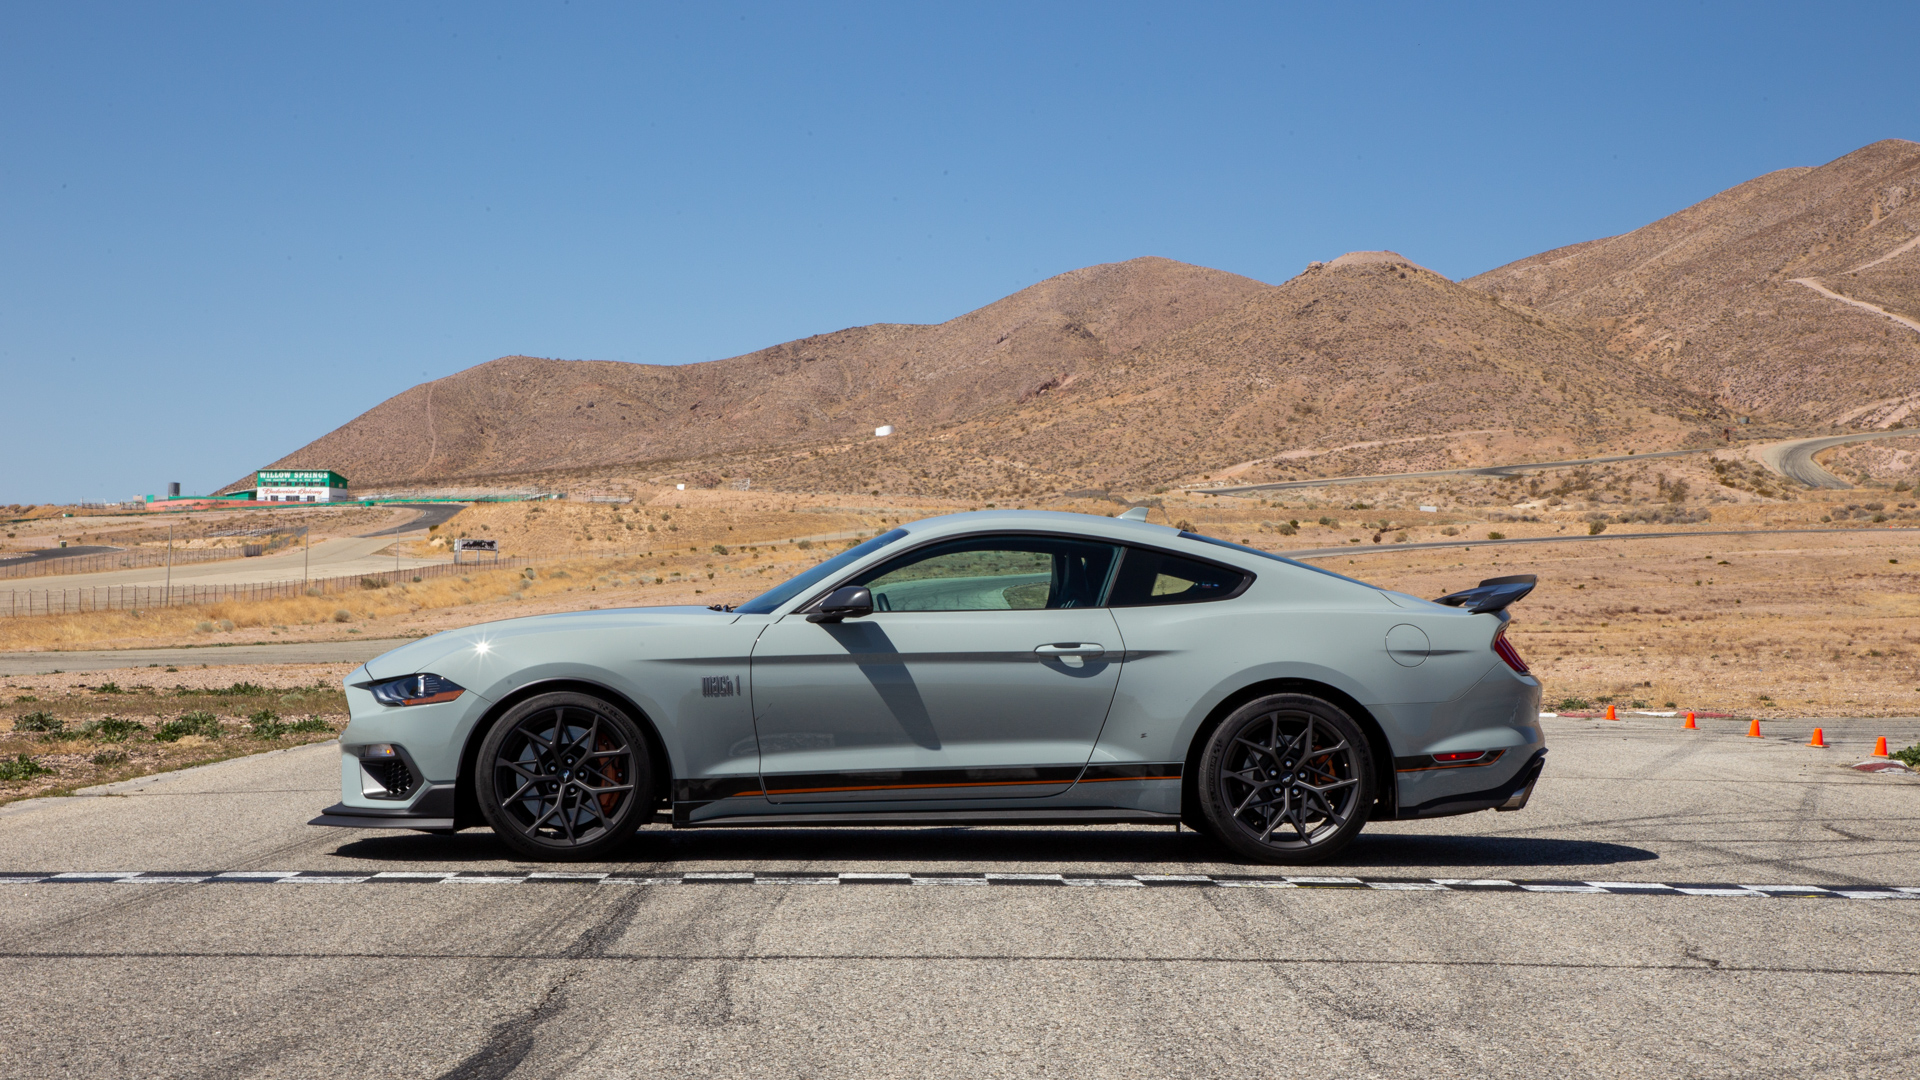 First drive review: 2021 Ford Mustang Mach 1 turns something borrowed into something new